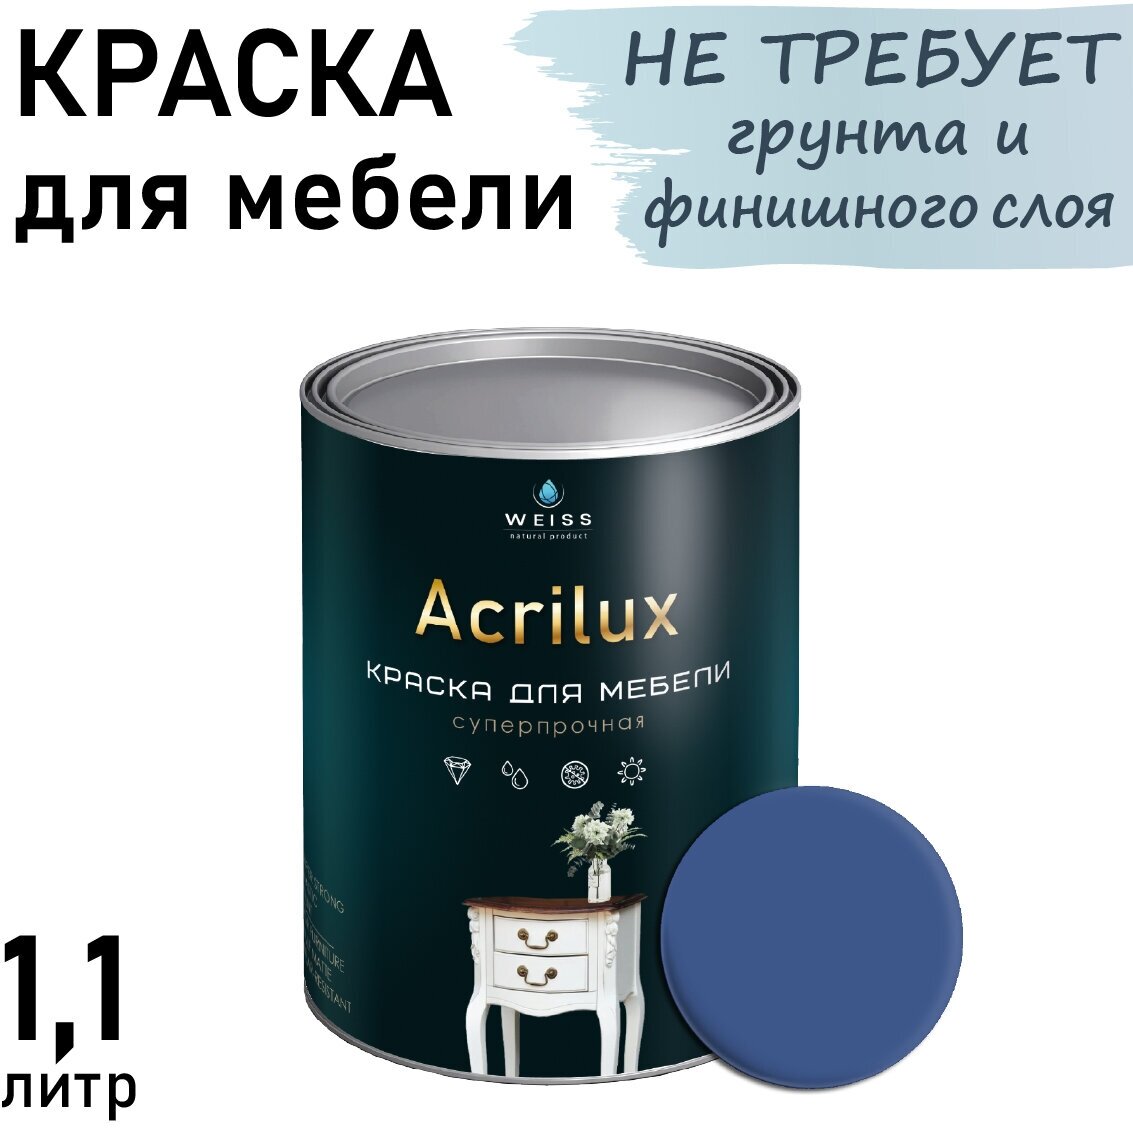  Acrilux   1.1 RAL 5007,   ,  ,  , .  